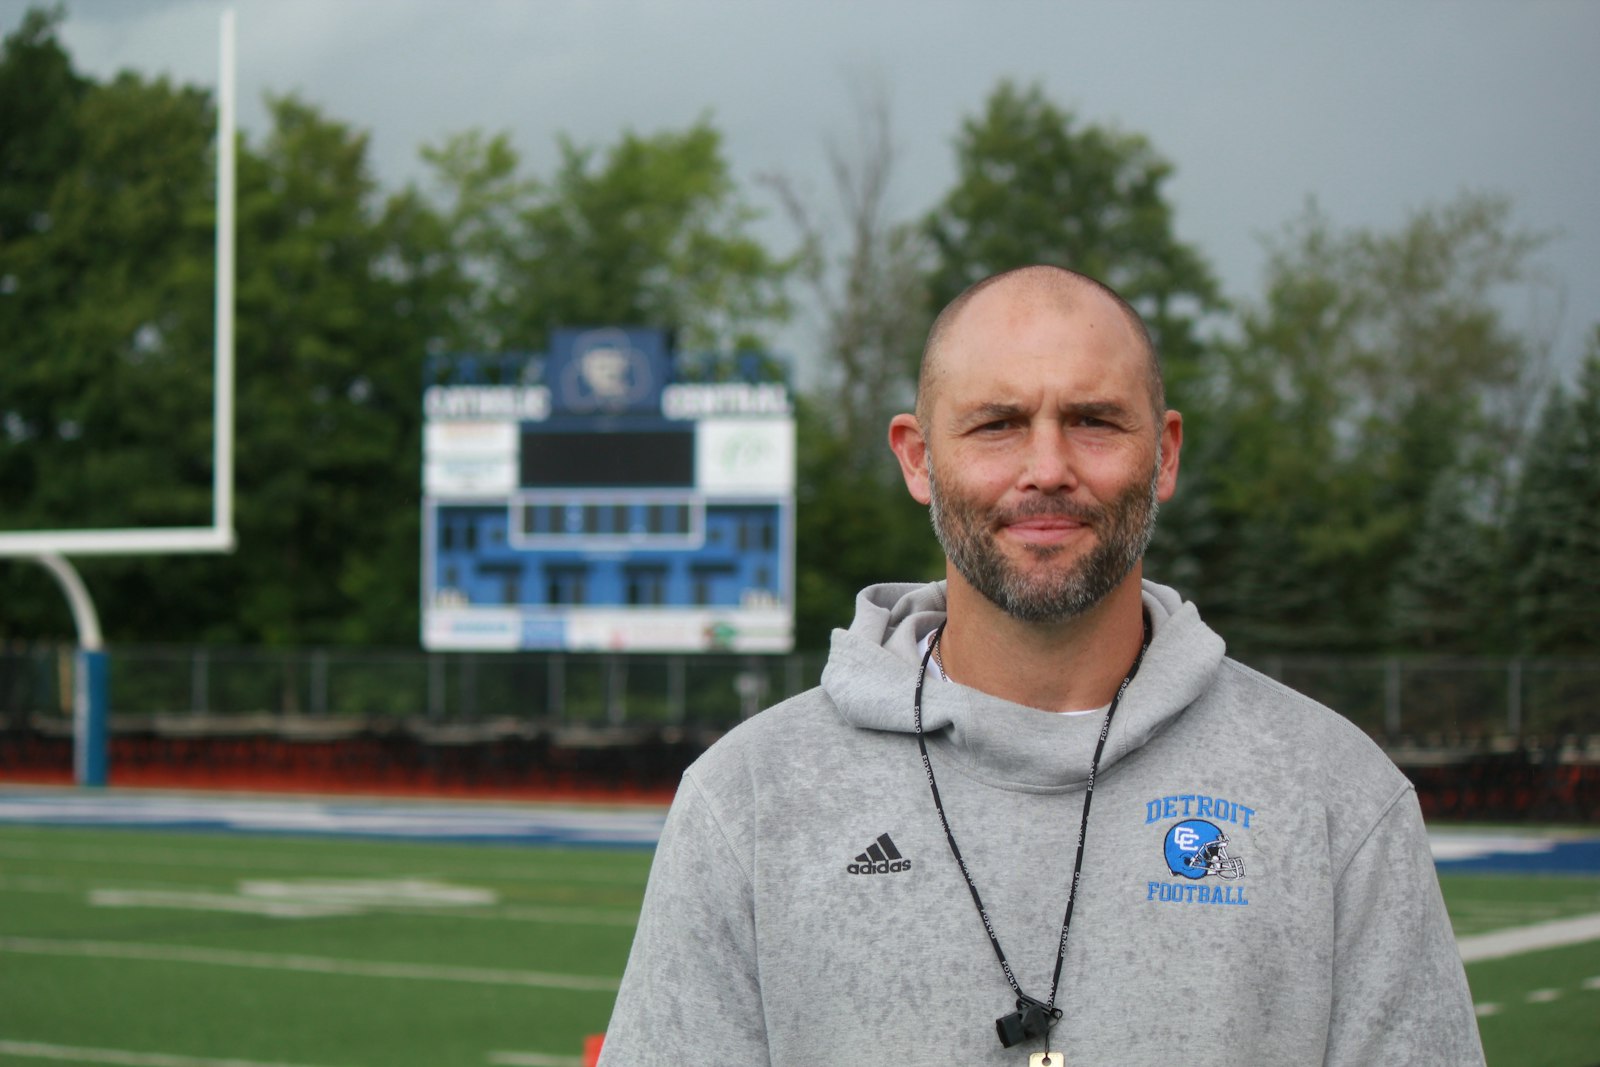 The captain of the Shamrocks’ state champion squads in 1997 and 1998, Justin Cessante is glad to be back on the Detroit Catholic Central sideline as the team’s new head coach.